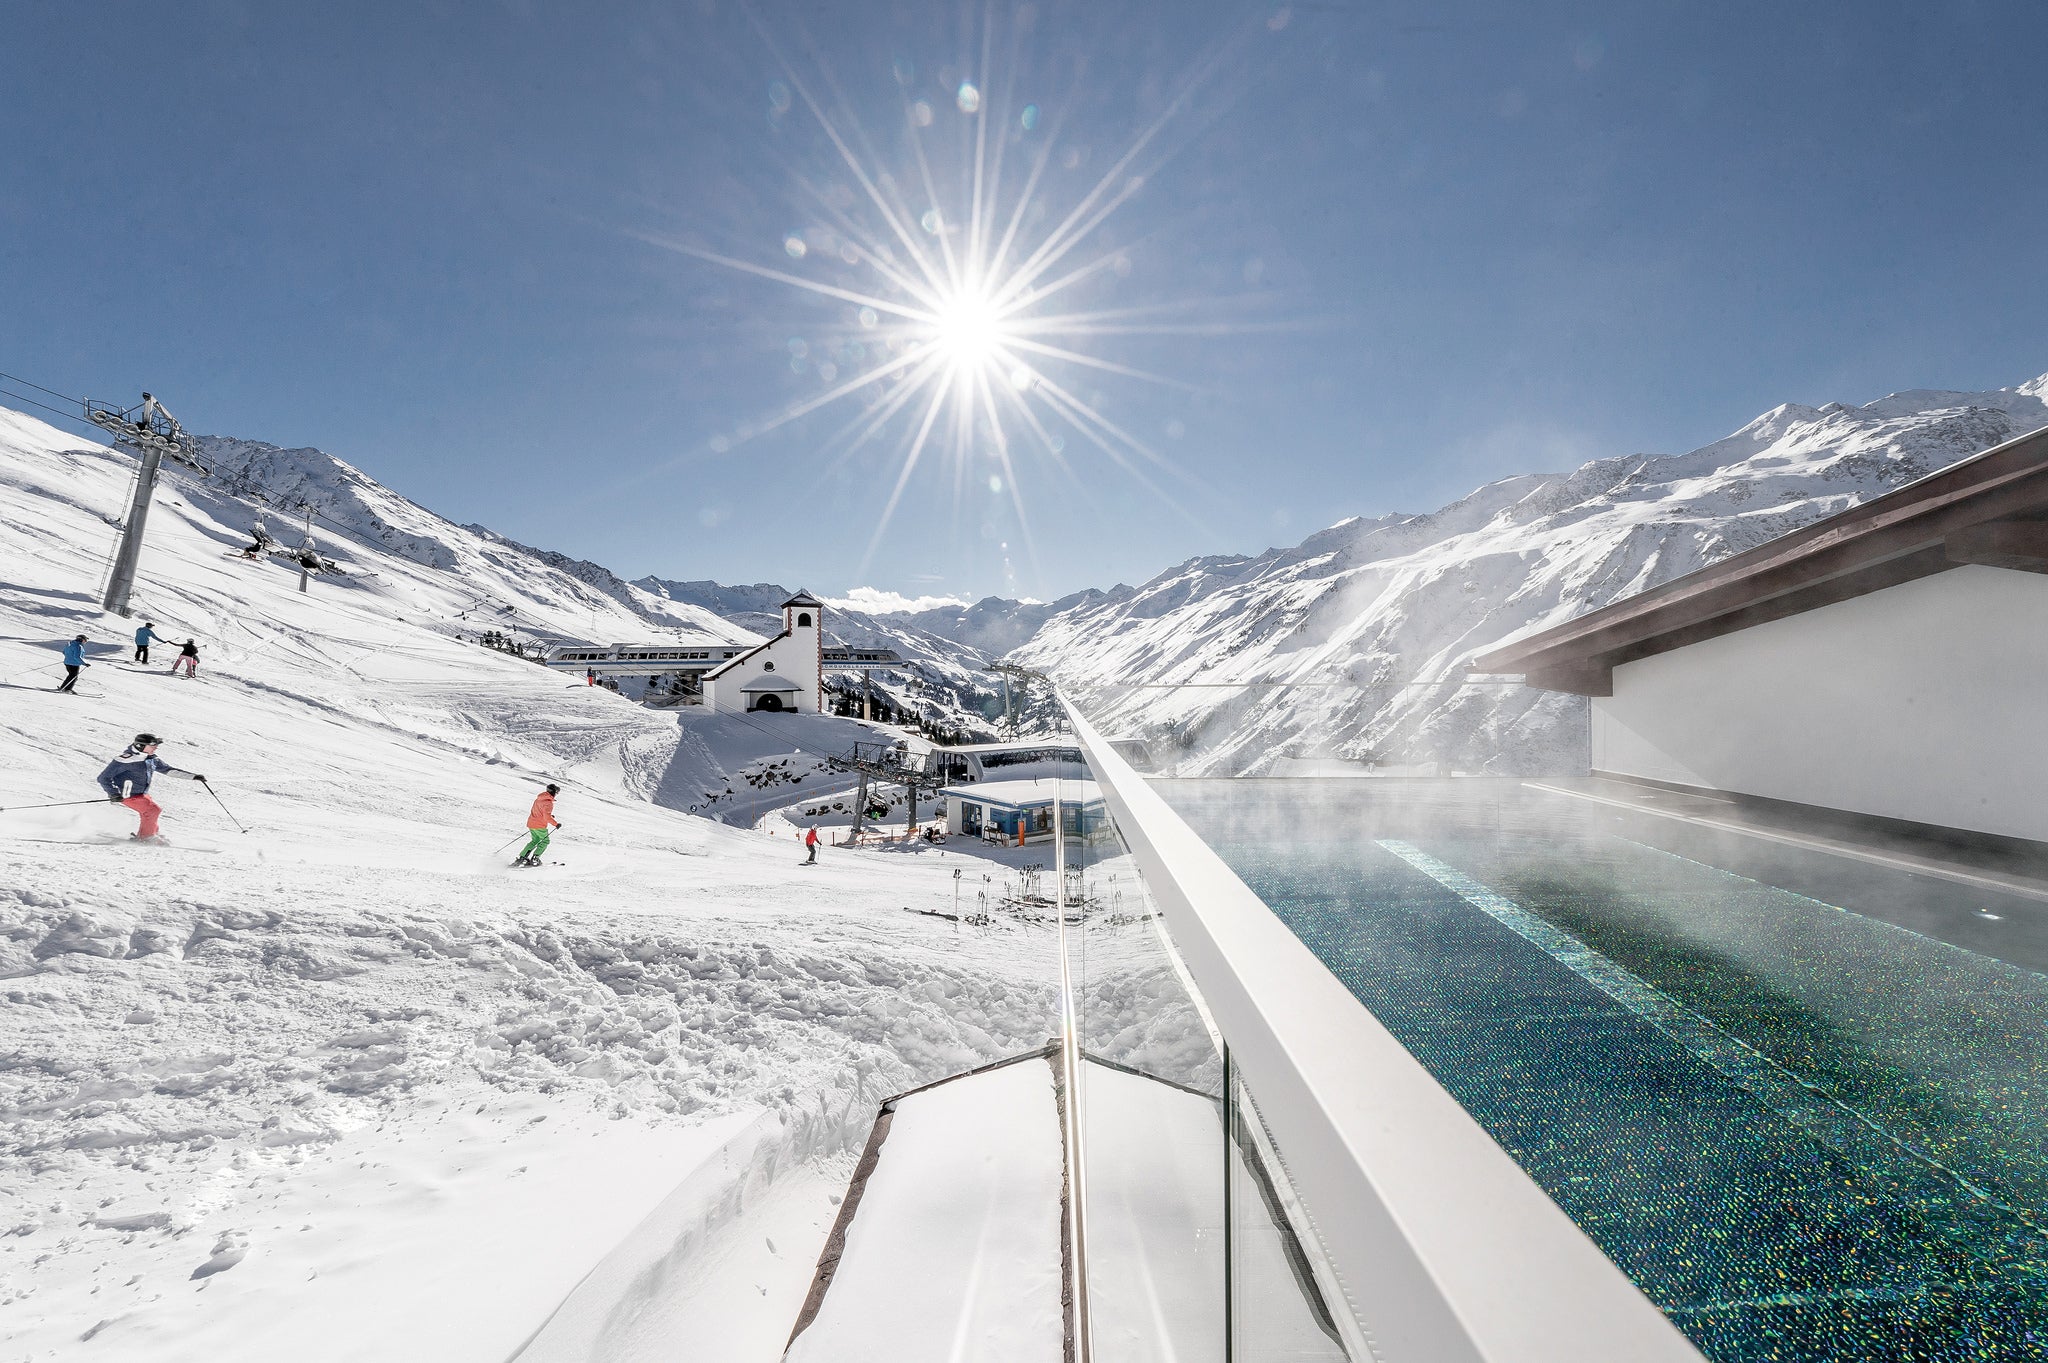 Top Hotel’s spa has an outdoor pool with slopeside views (Top Hochgurgl)